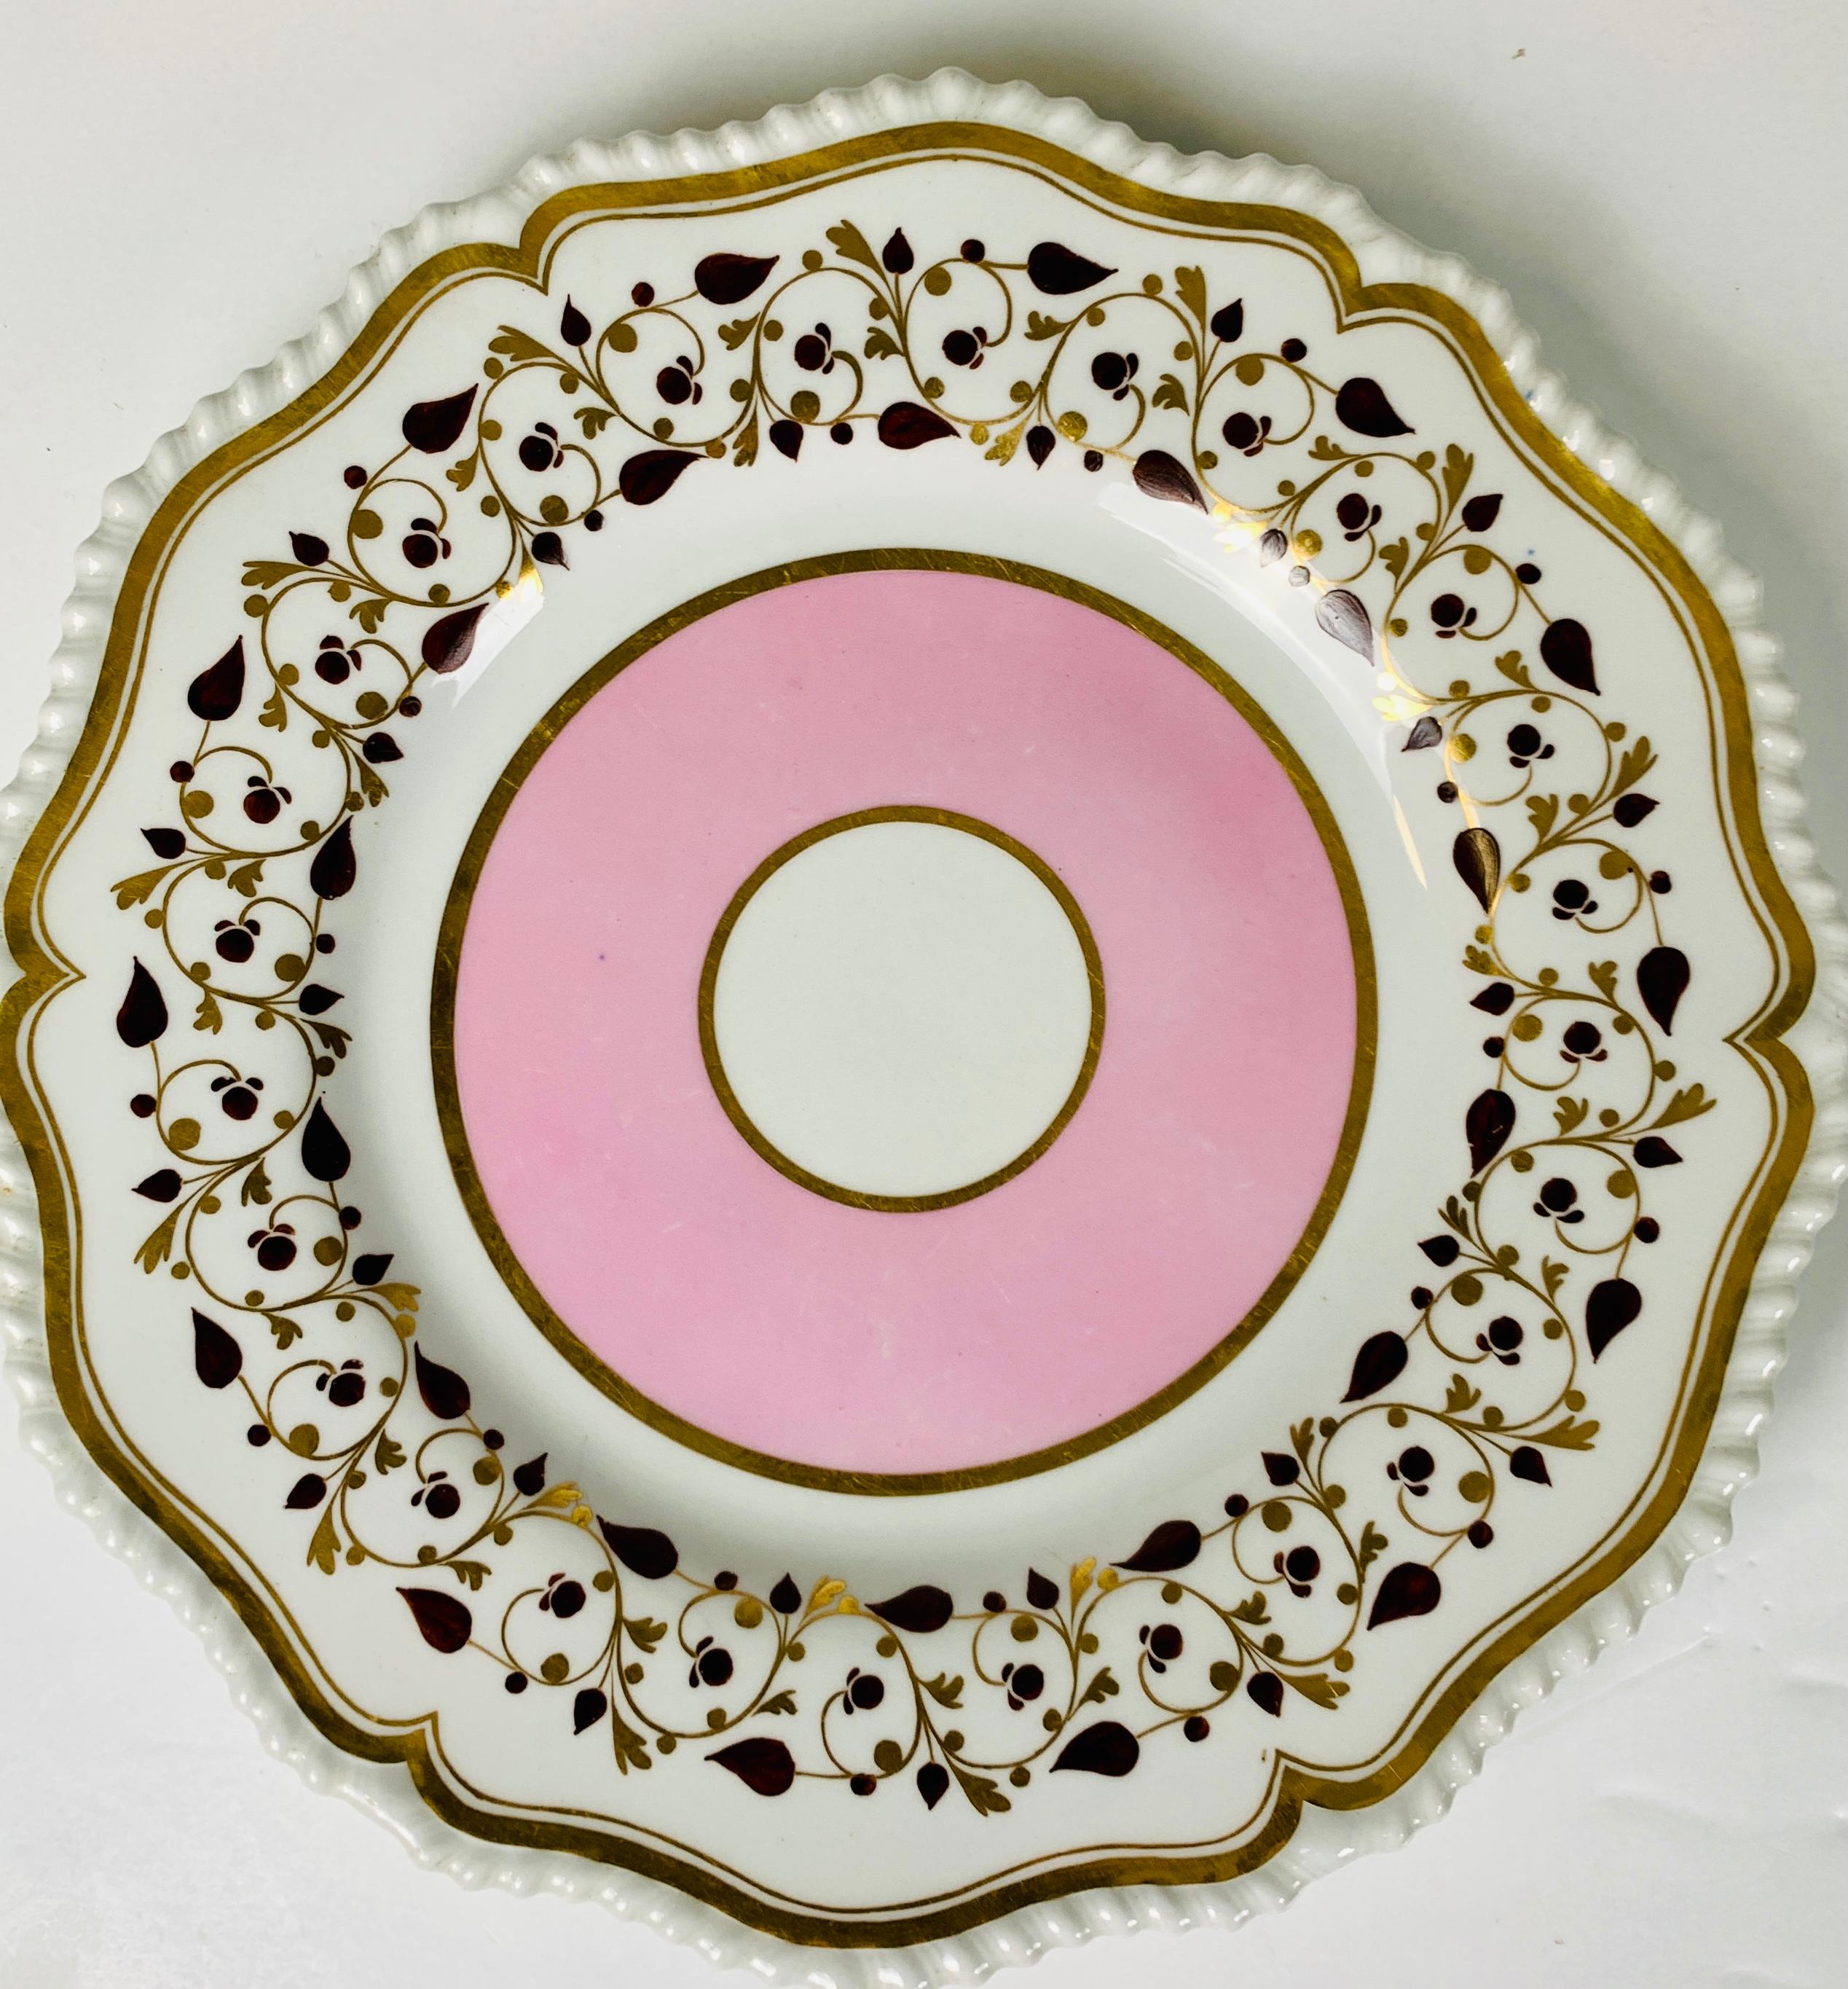 The sweetness of the beautiful pink band is tempered by the brown leaves and berries and the gilded vines surrounding it.
The bright white porcelain allows the pink enamels and the gilding to stand out.
Flight Barr Barr Worcester made these fine